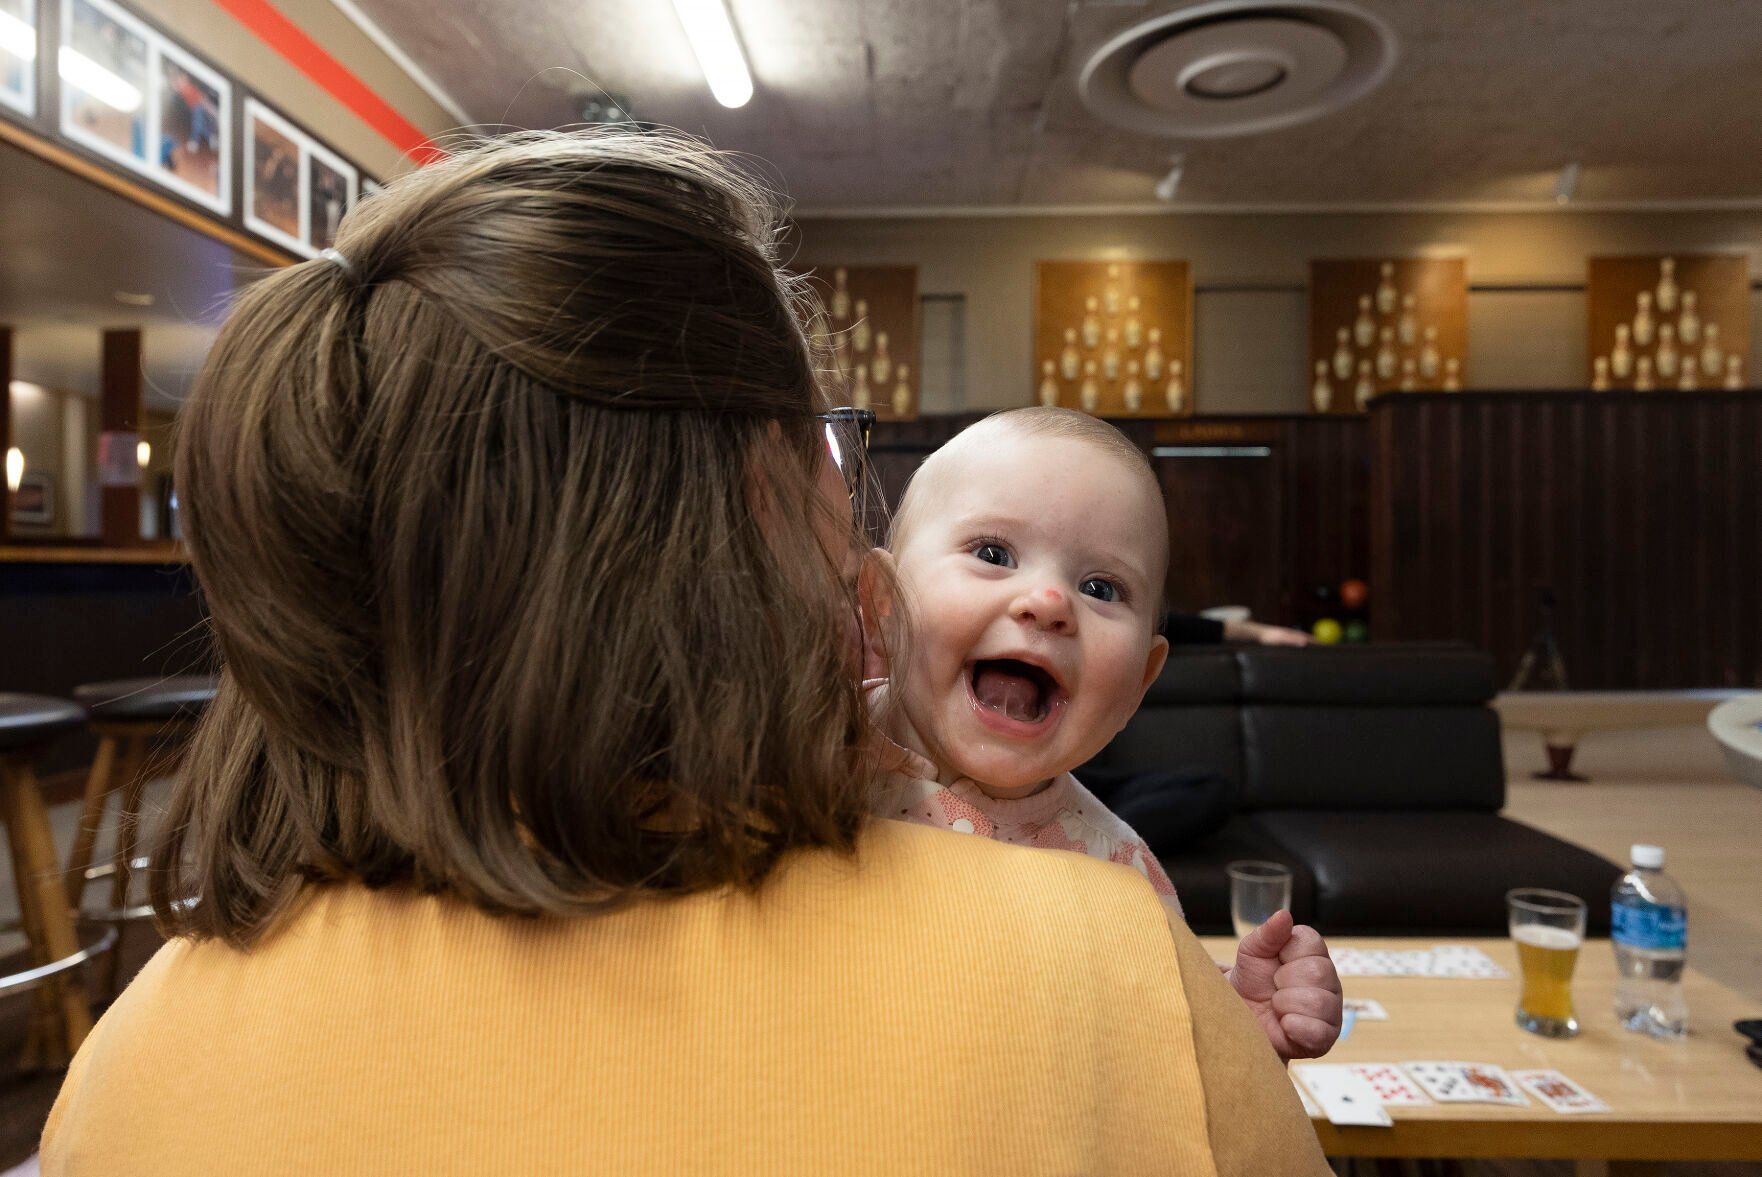 Ruth Carlson holds daughter Gianna, 7 months, during an evening of bowling at Fischer Lanes in Dubuque on Thursday, May 4, 2023.    PHOTO CREDIT: Stephen Gassman
Telegraph Herald